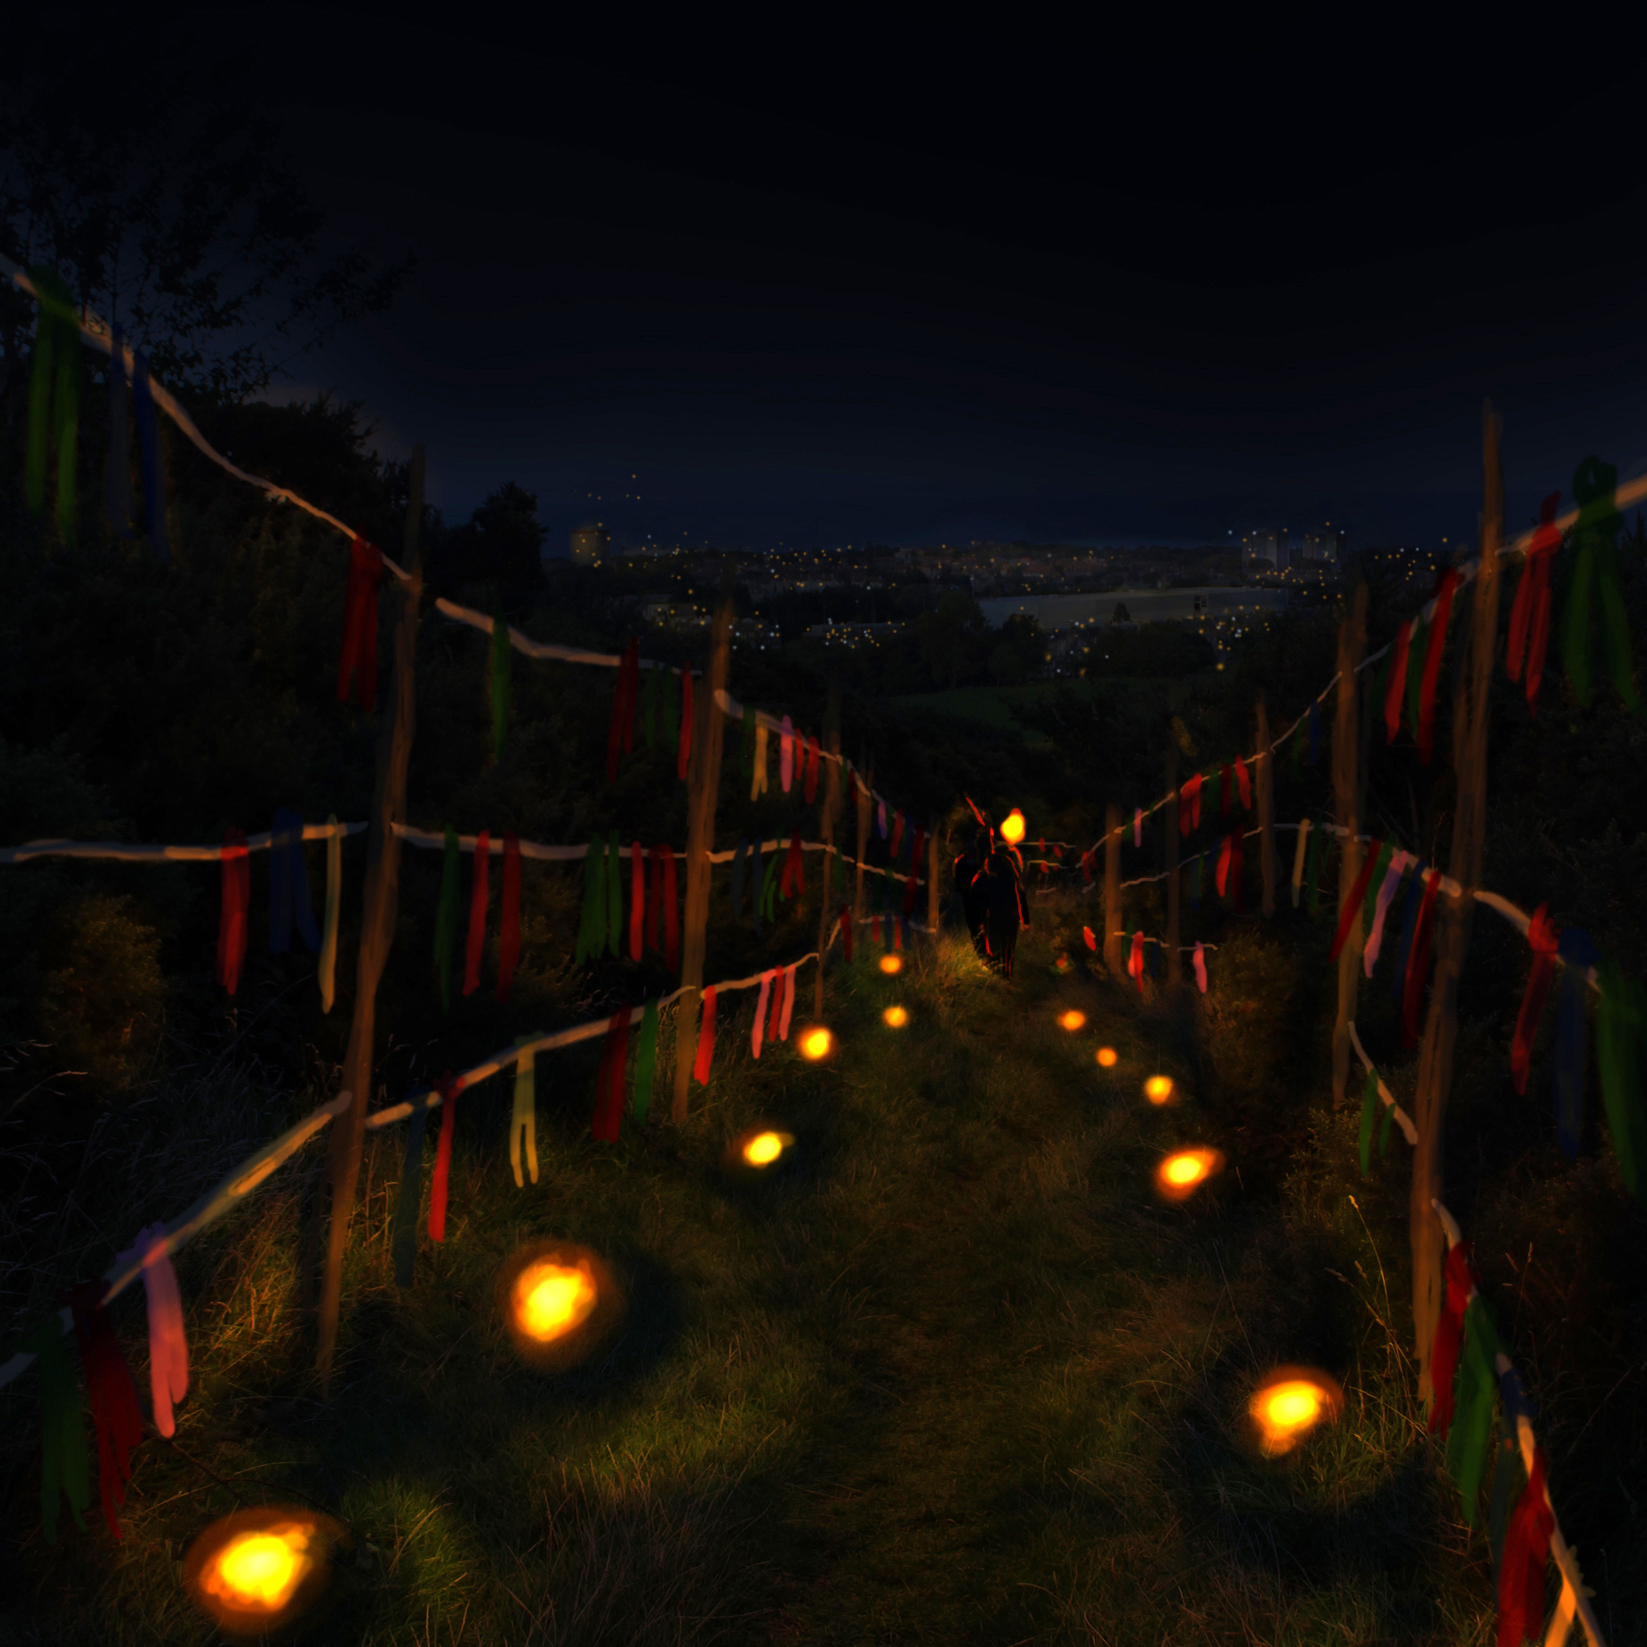 A digital storyboard illustration. Two wire fences, decorated with rags of fabric, run on either side of a path, downhill between the shrubberies. It is dark and at the bases of the fences are lights. In the distance a figure with a lantern can be spotted, and eventually the glittering lights of a city.